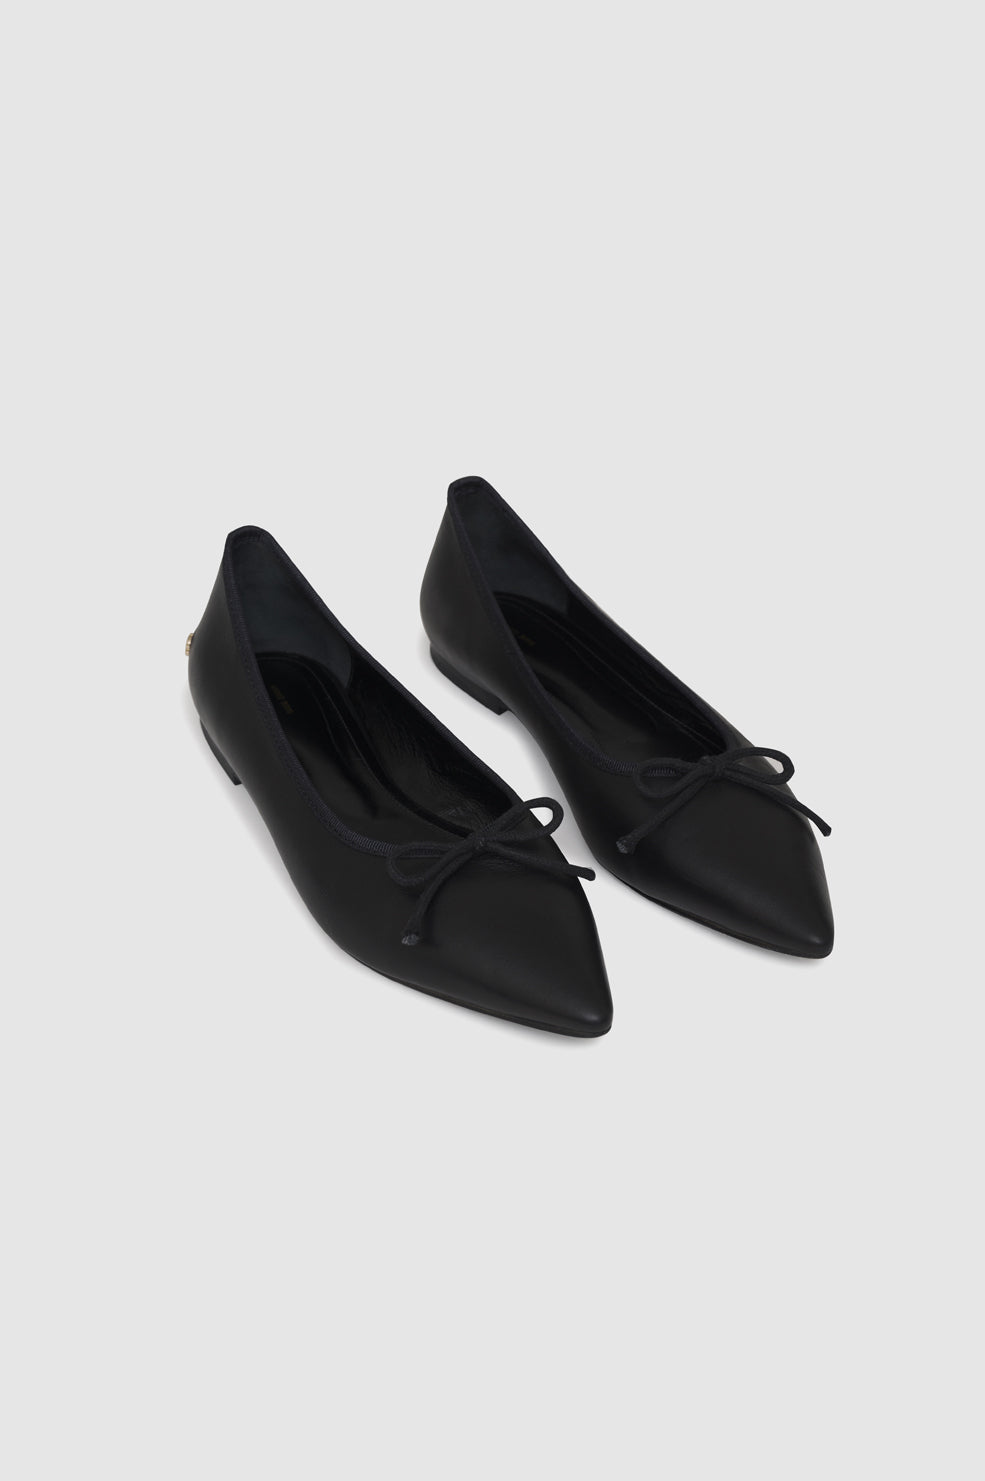 ANINE BING Delphine Flats - Black - Front Pair View